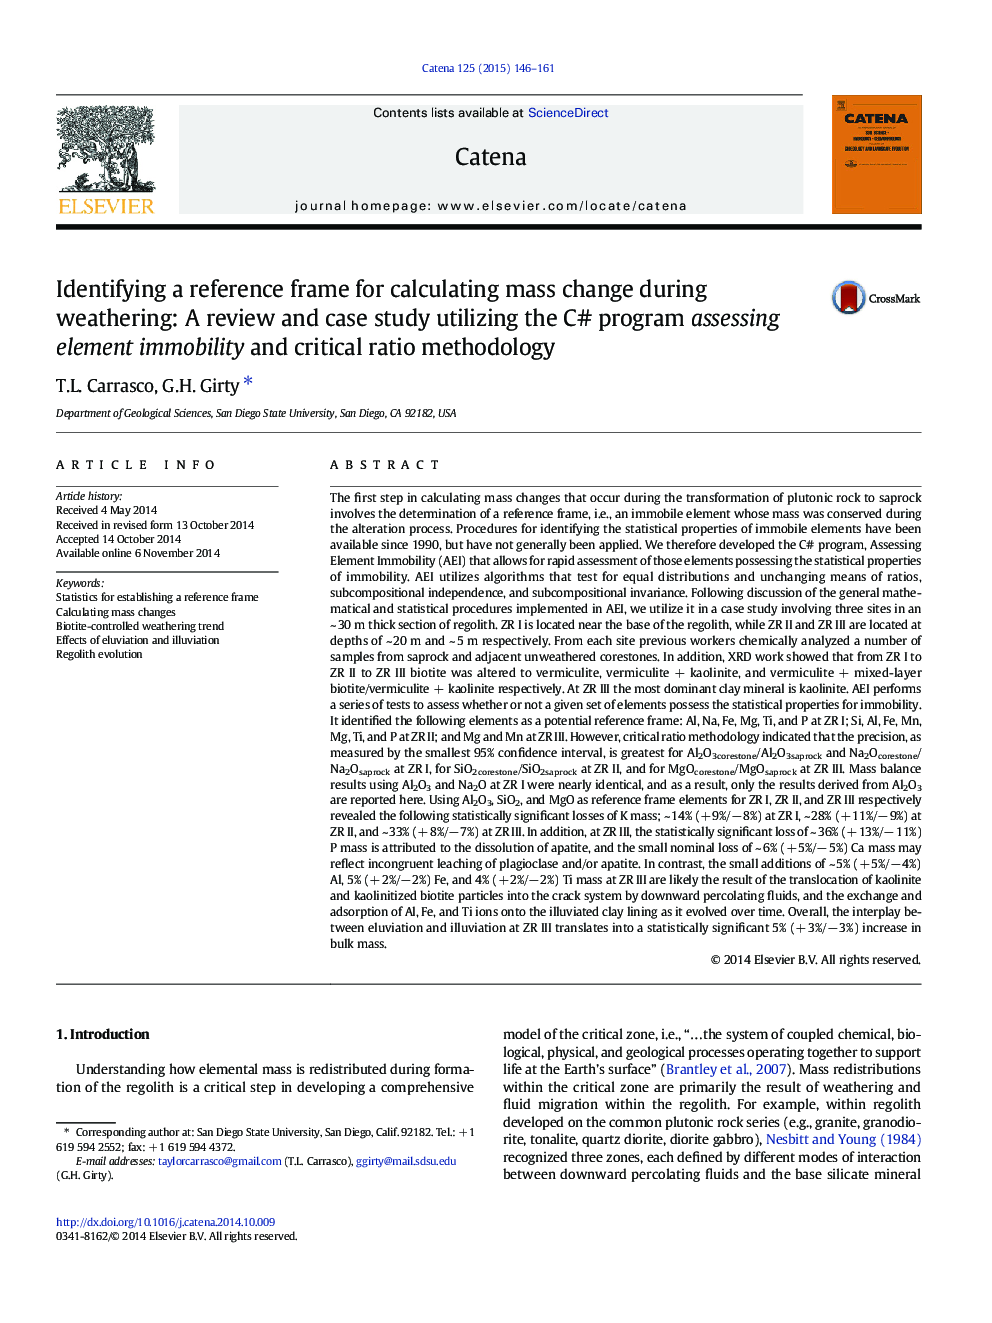 Identifying a reference frame for calculating mass change during weathering: A review and case study utilizing the C# program assessing element immobility and critical ratio methodology